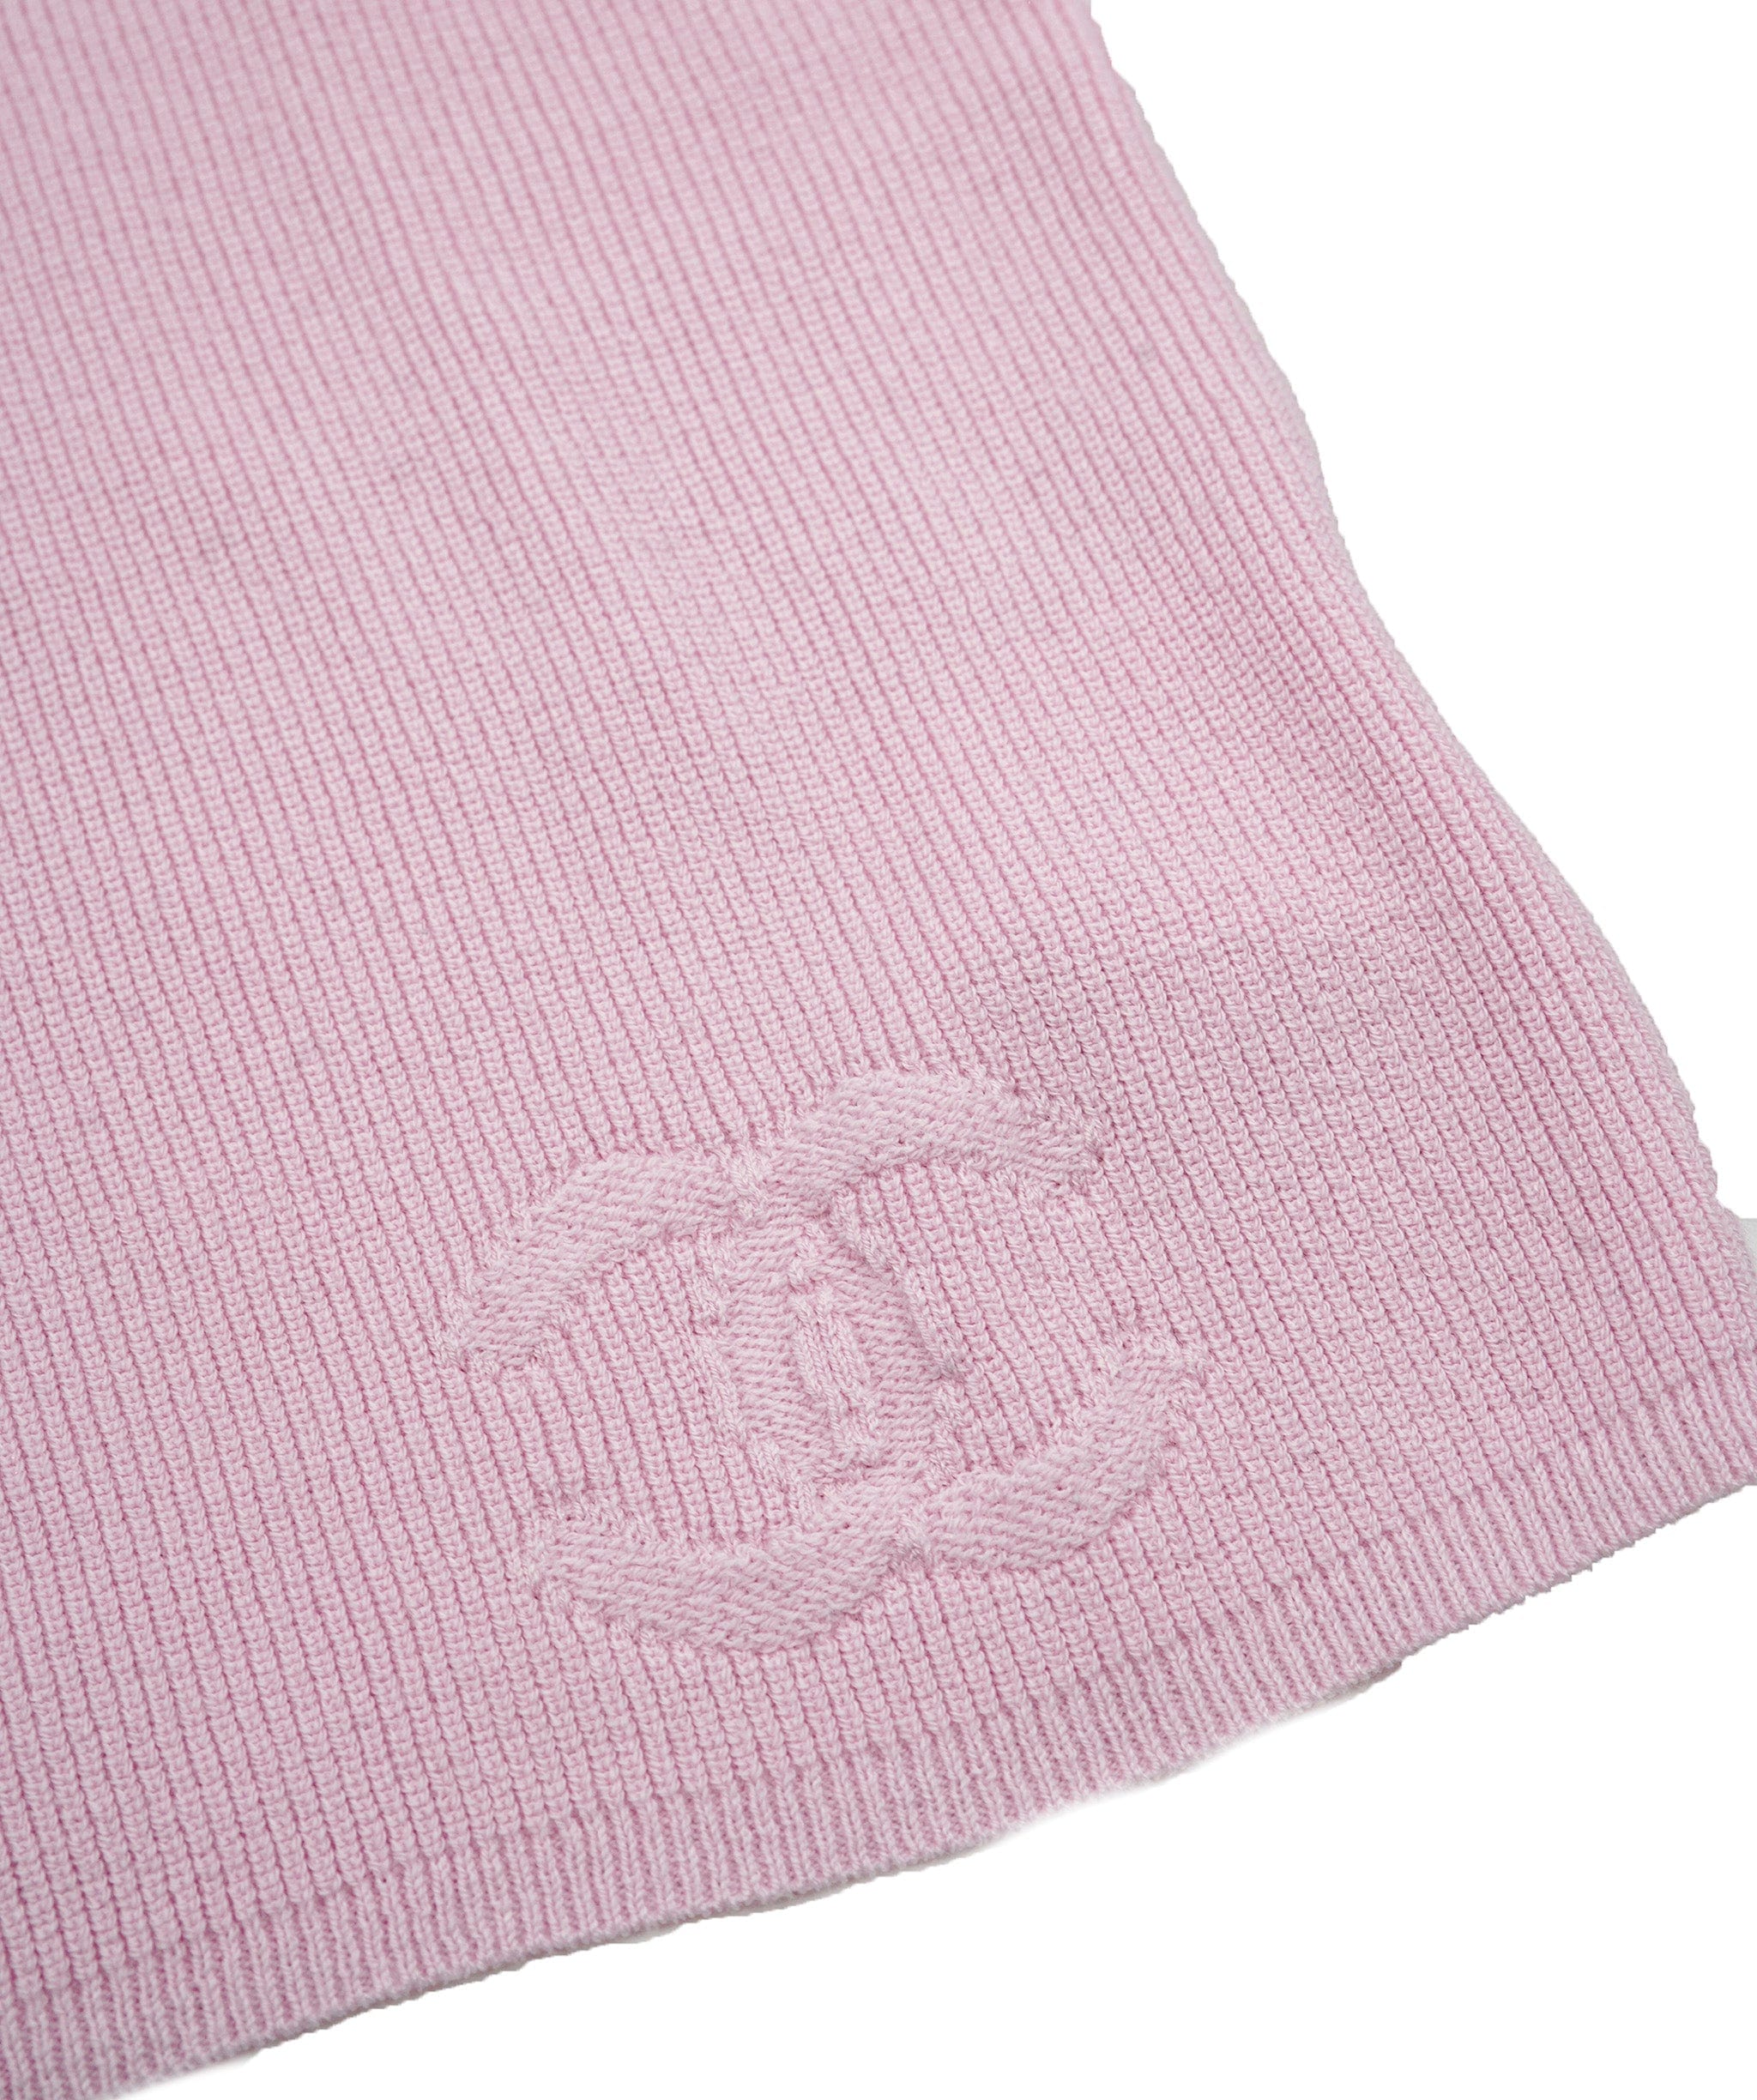 Chanel Chanel Knit Top Pink ASL5018